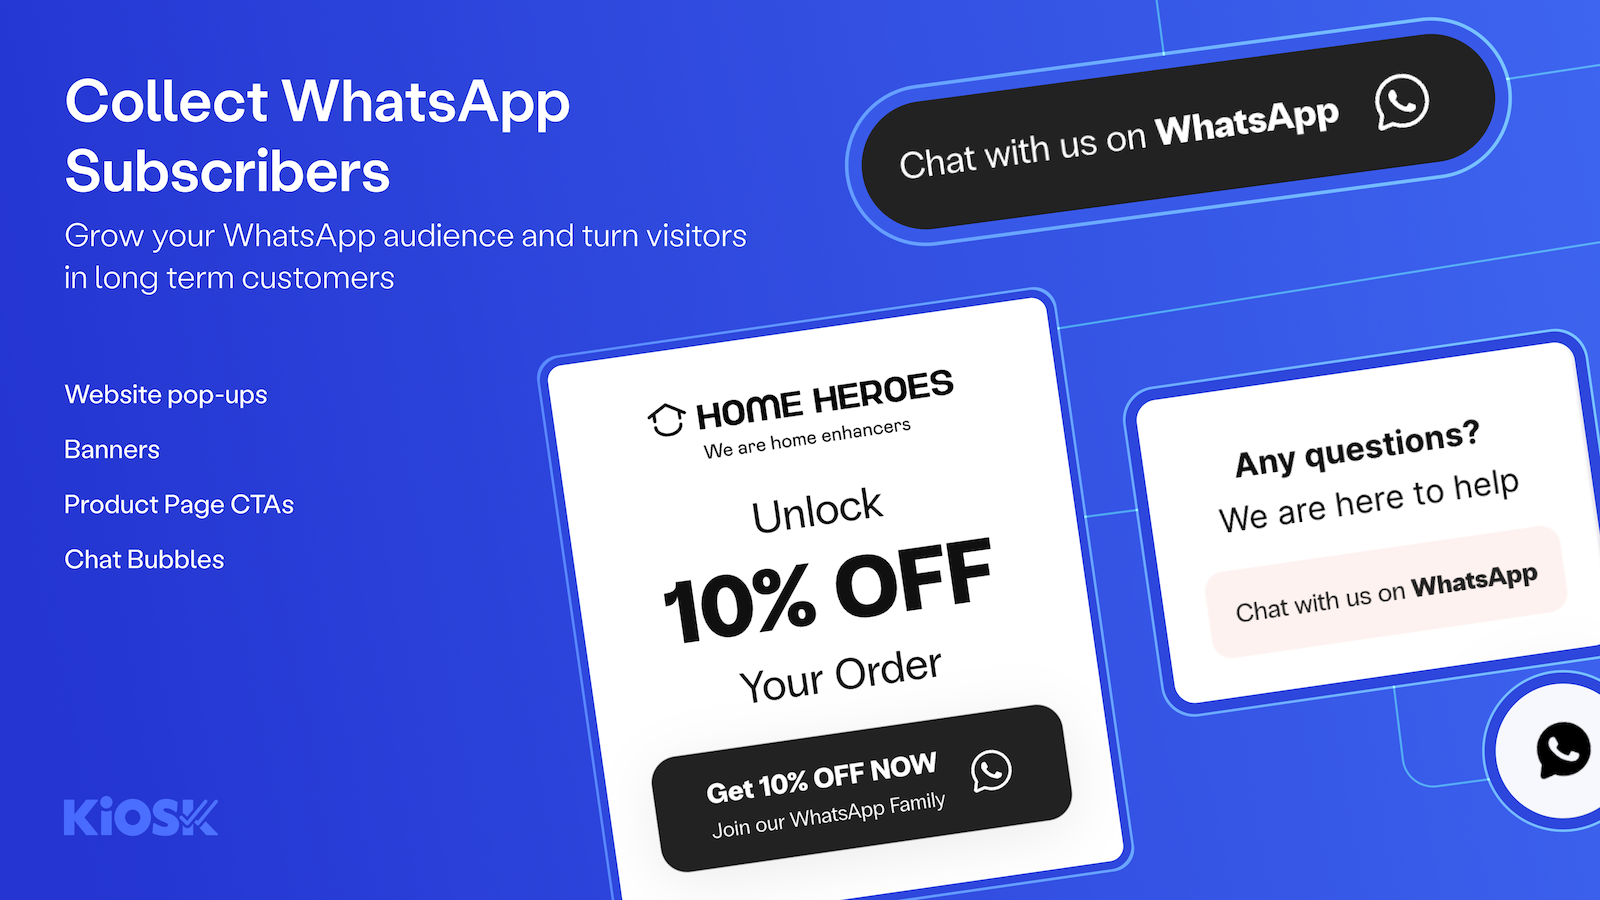 Collect WhatsApp subscribers and manage your audience